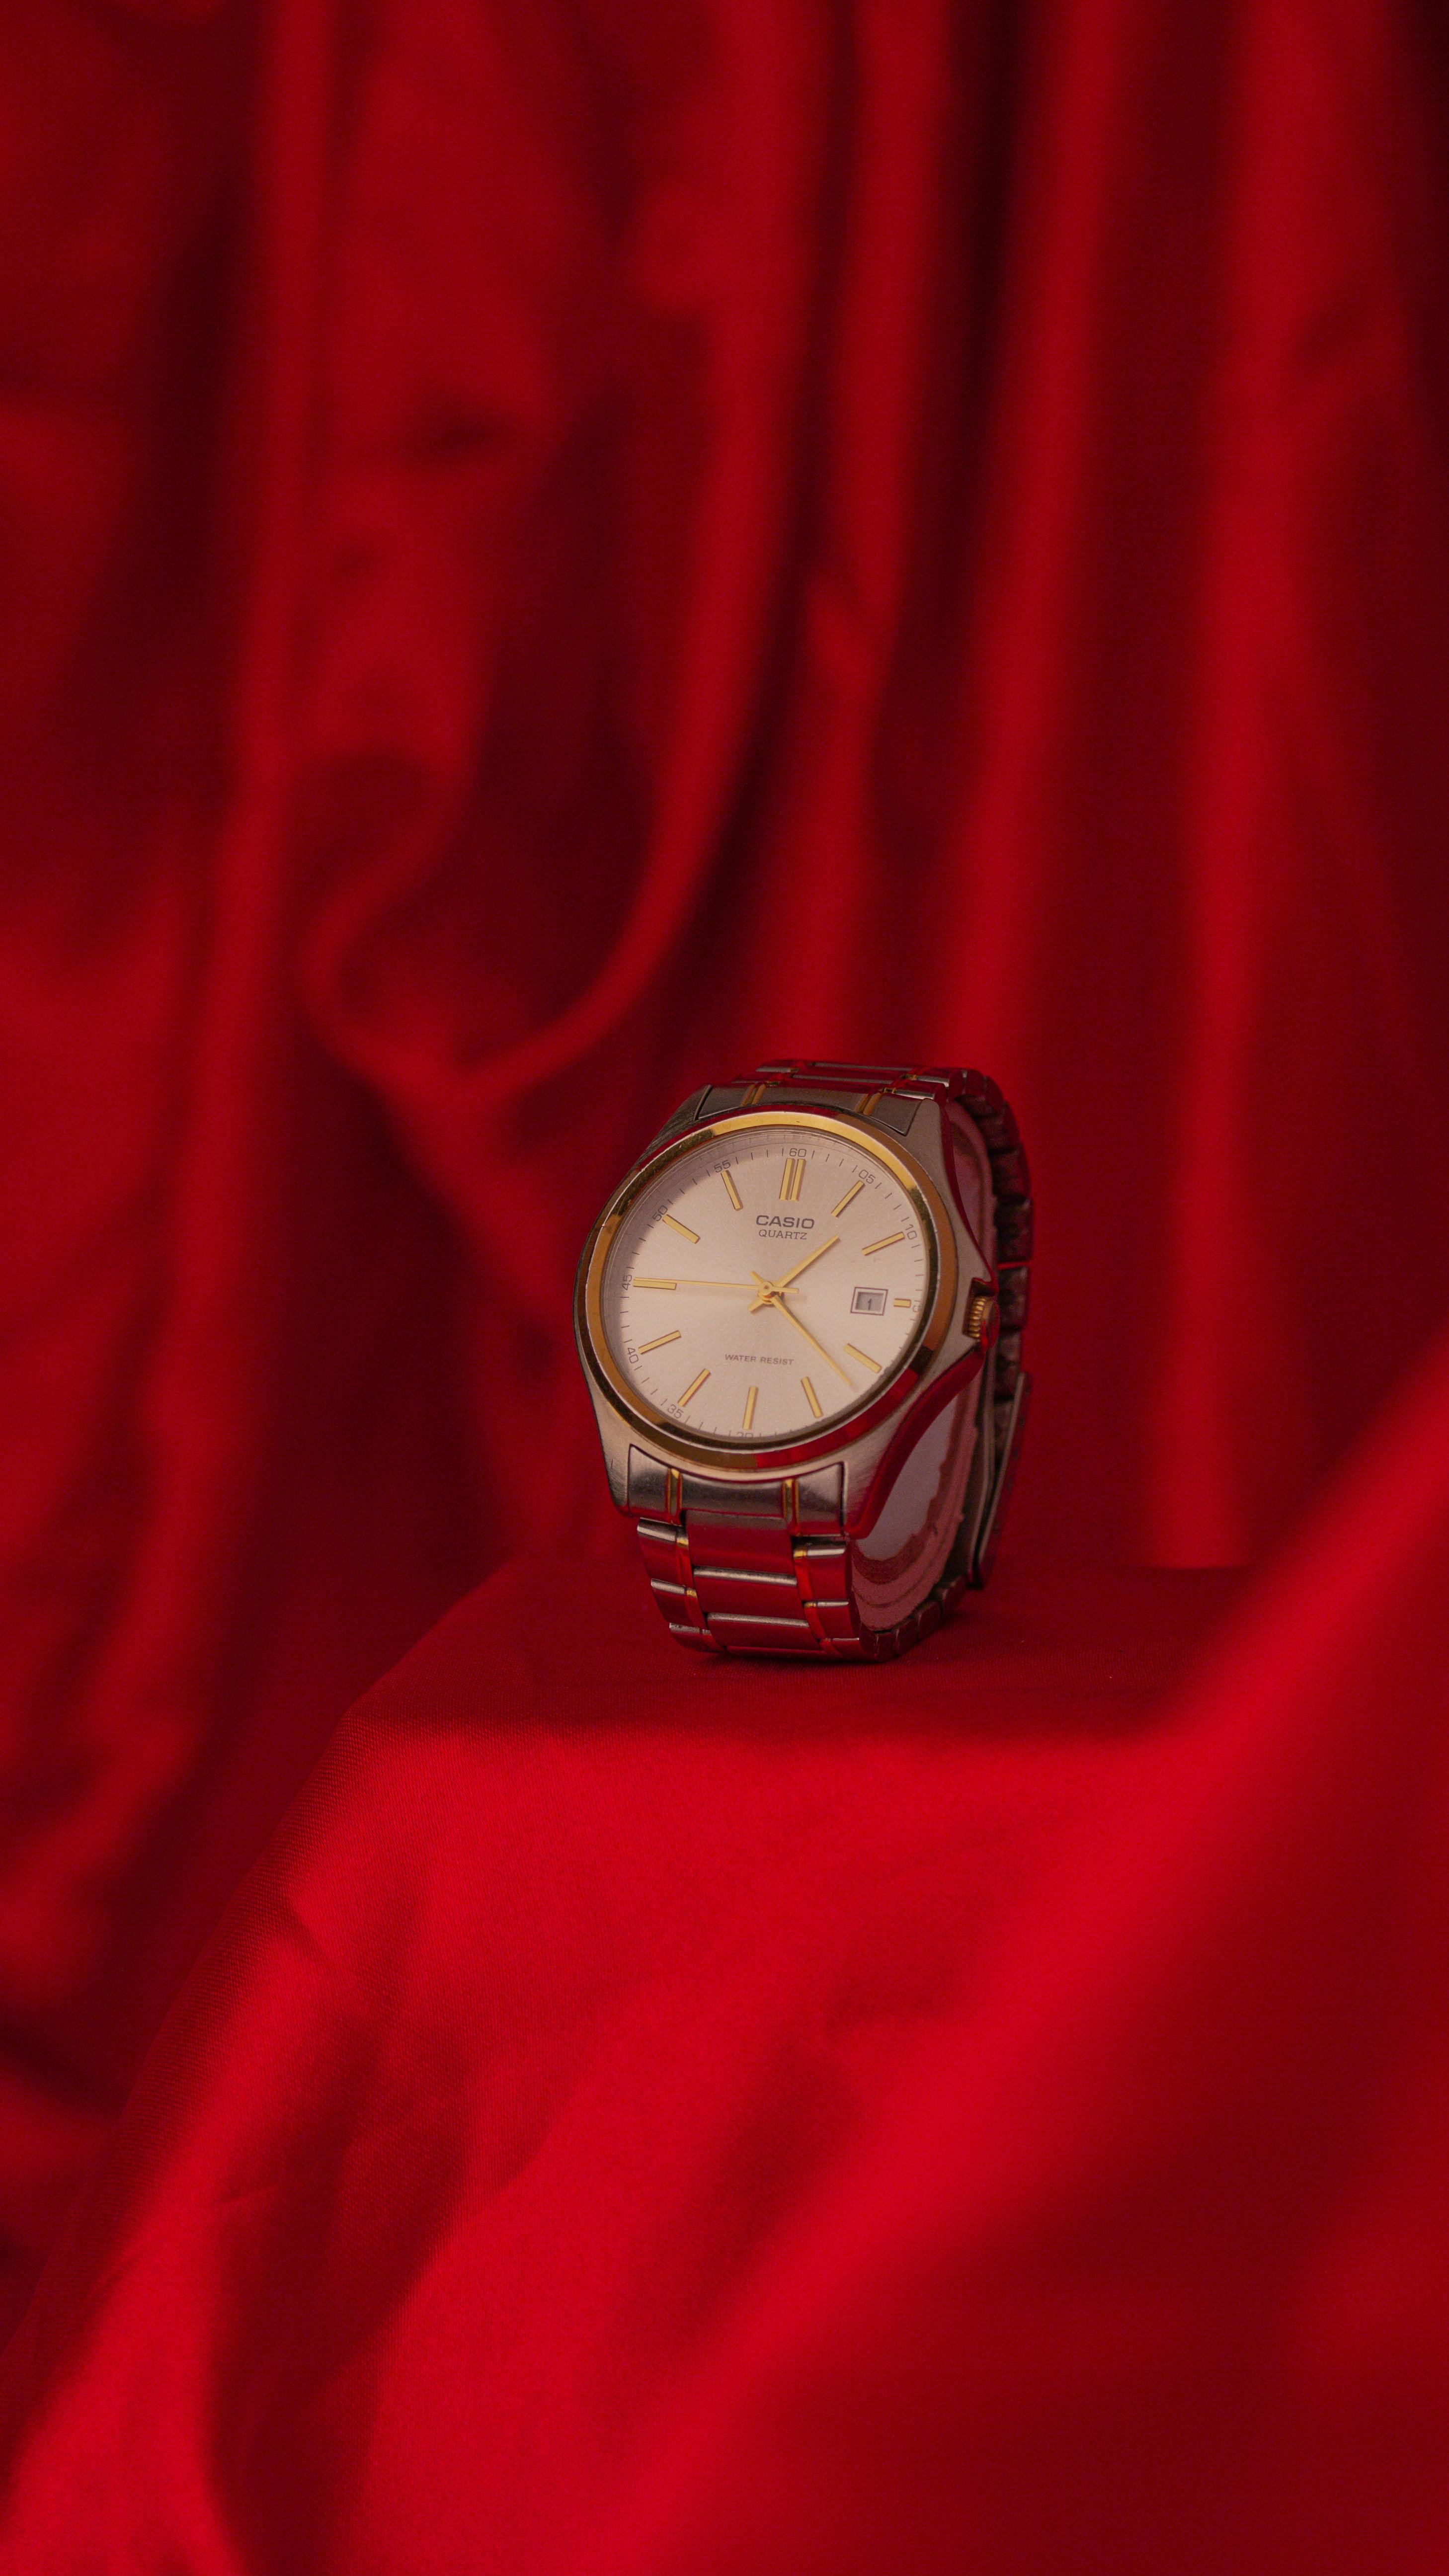 silver and gold round watch